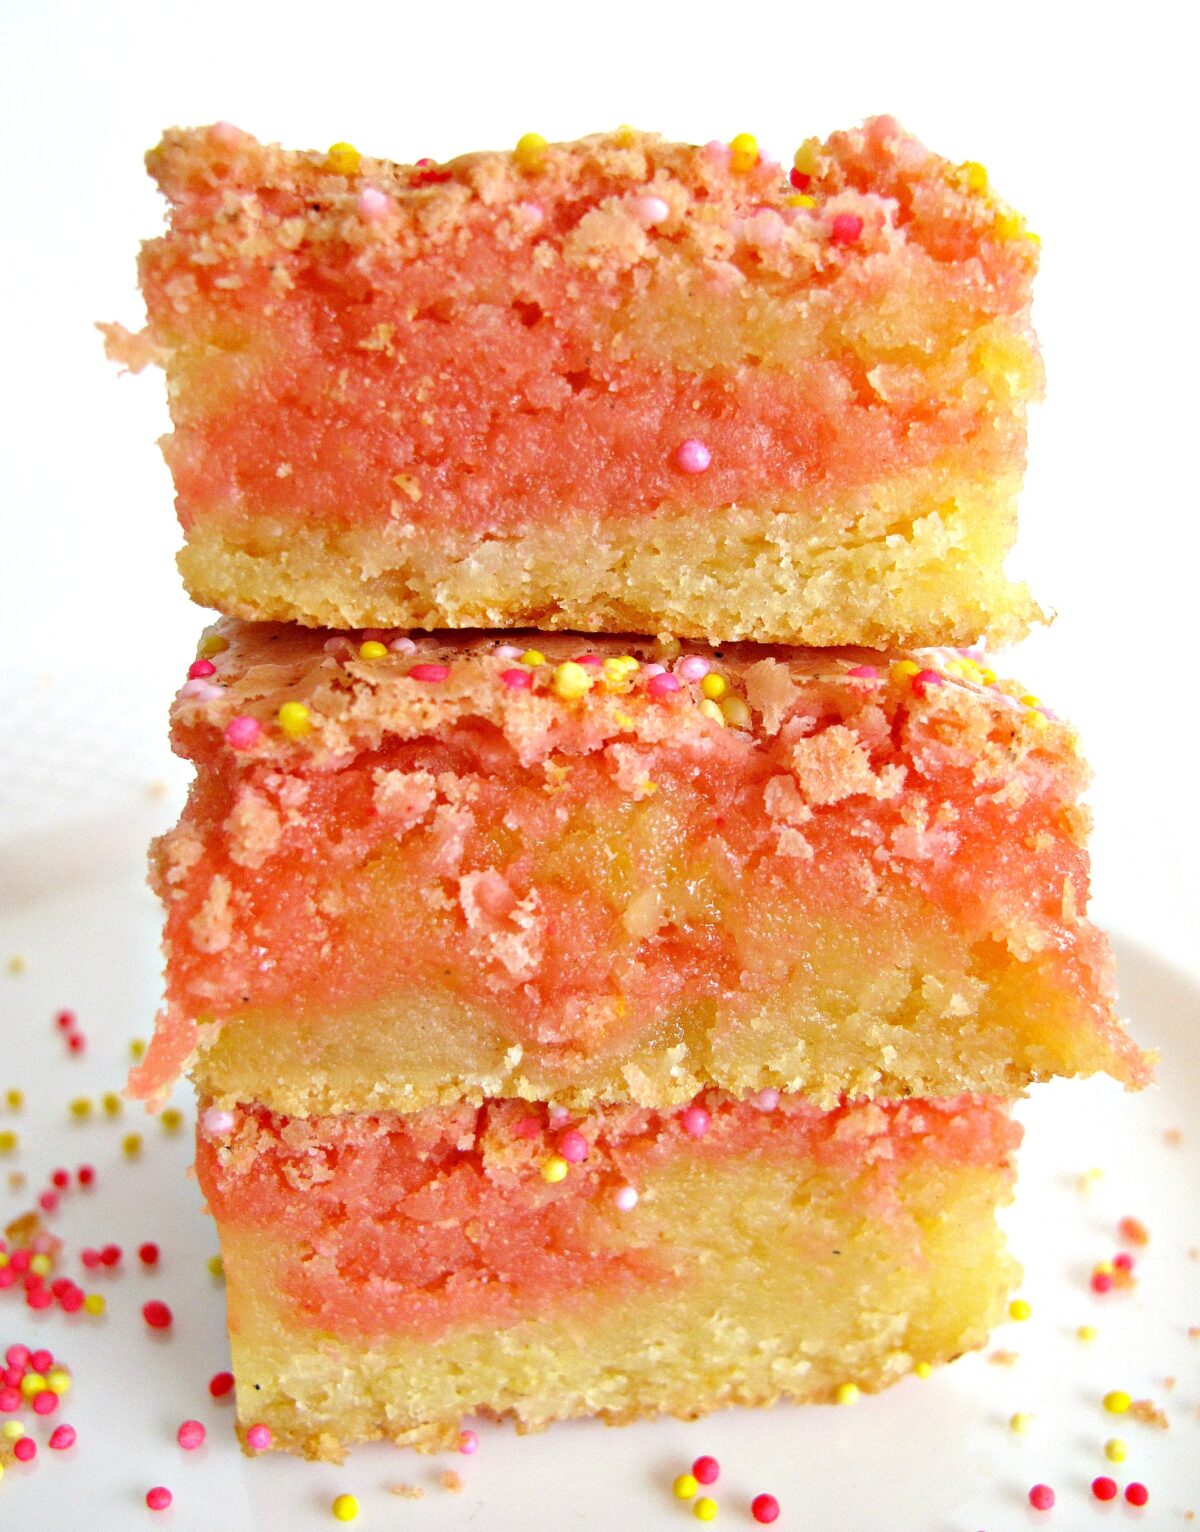 Stack of Strawberry Lemonade Bars showing thick yellow and pink striped interiors.